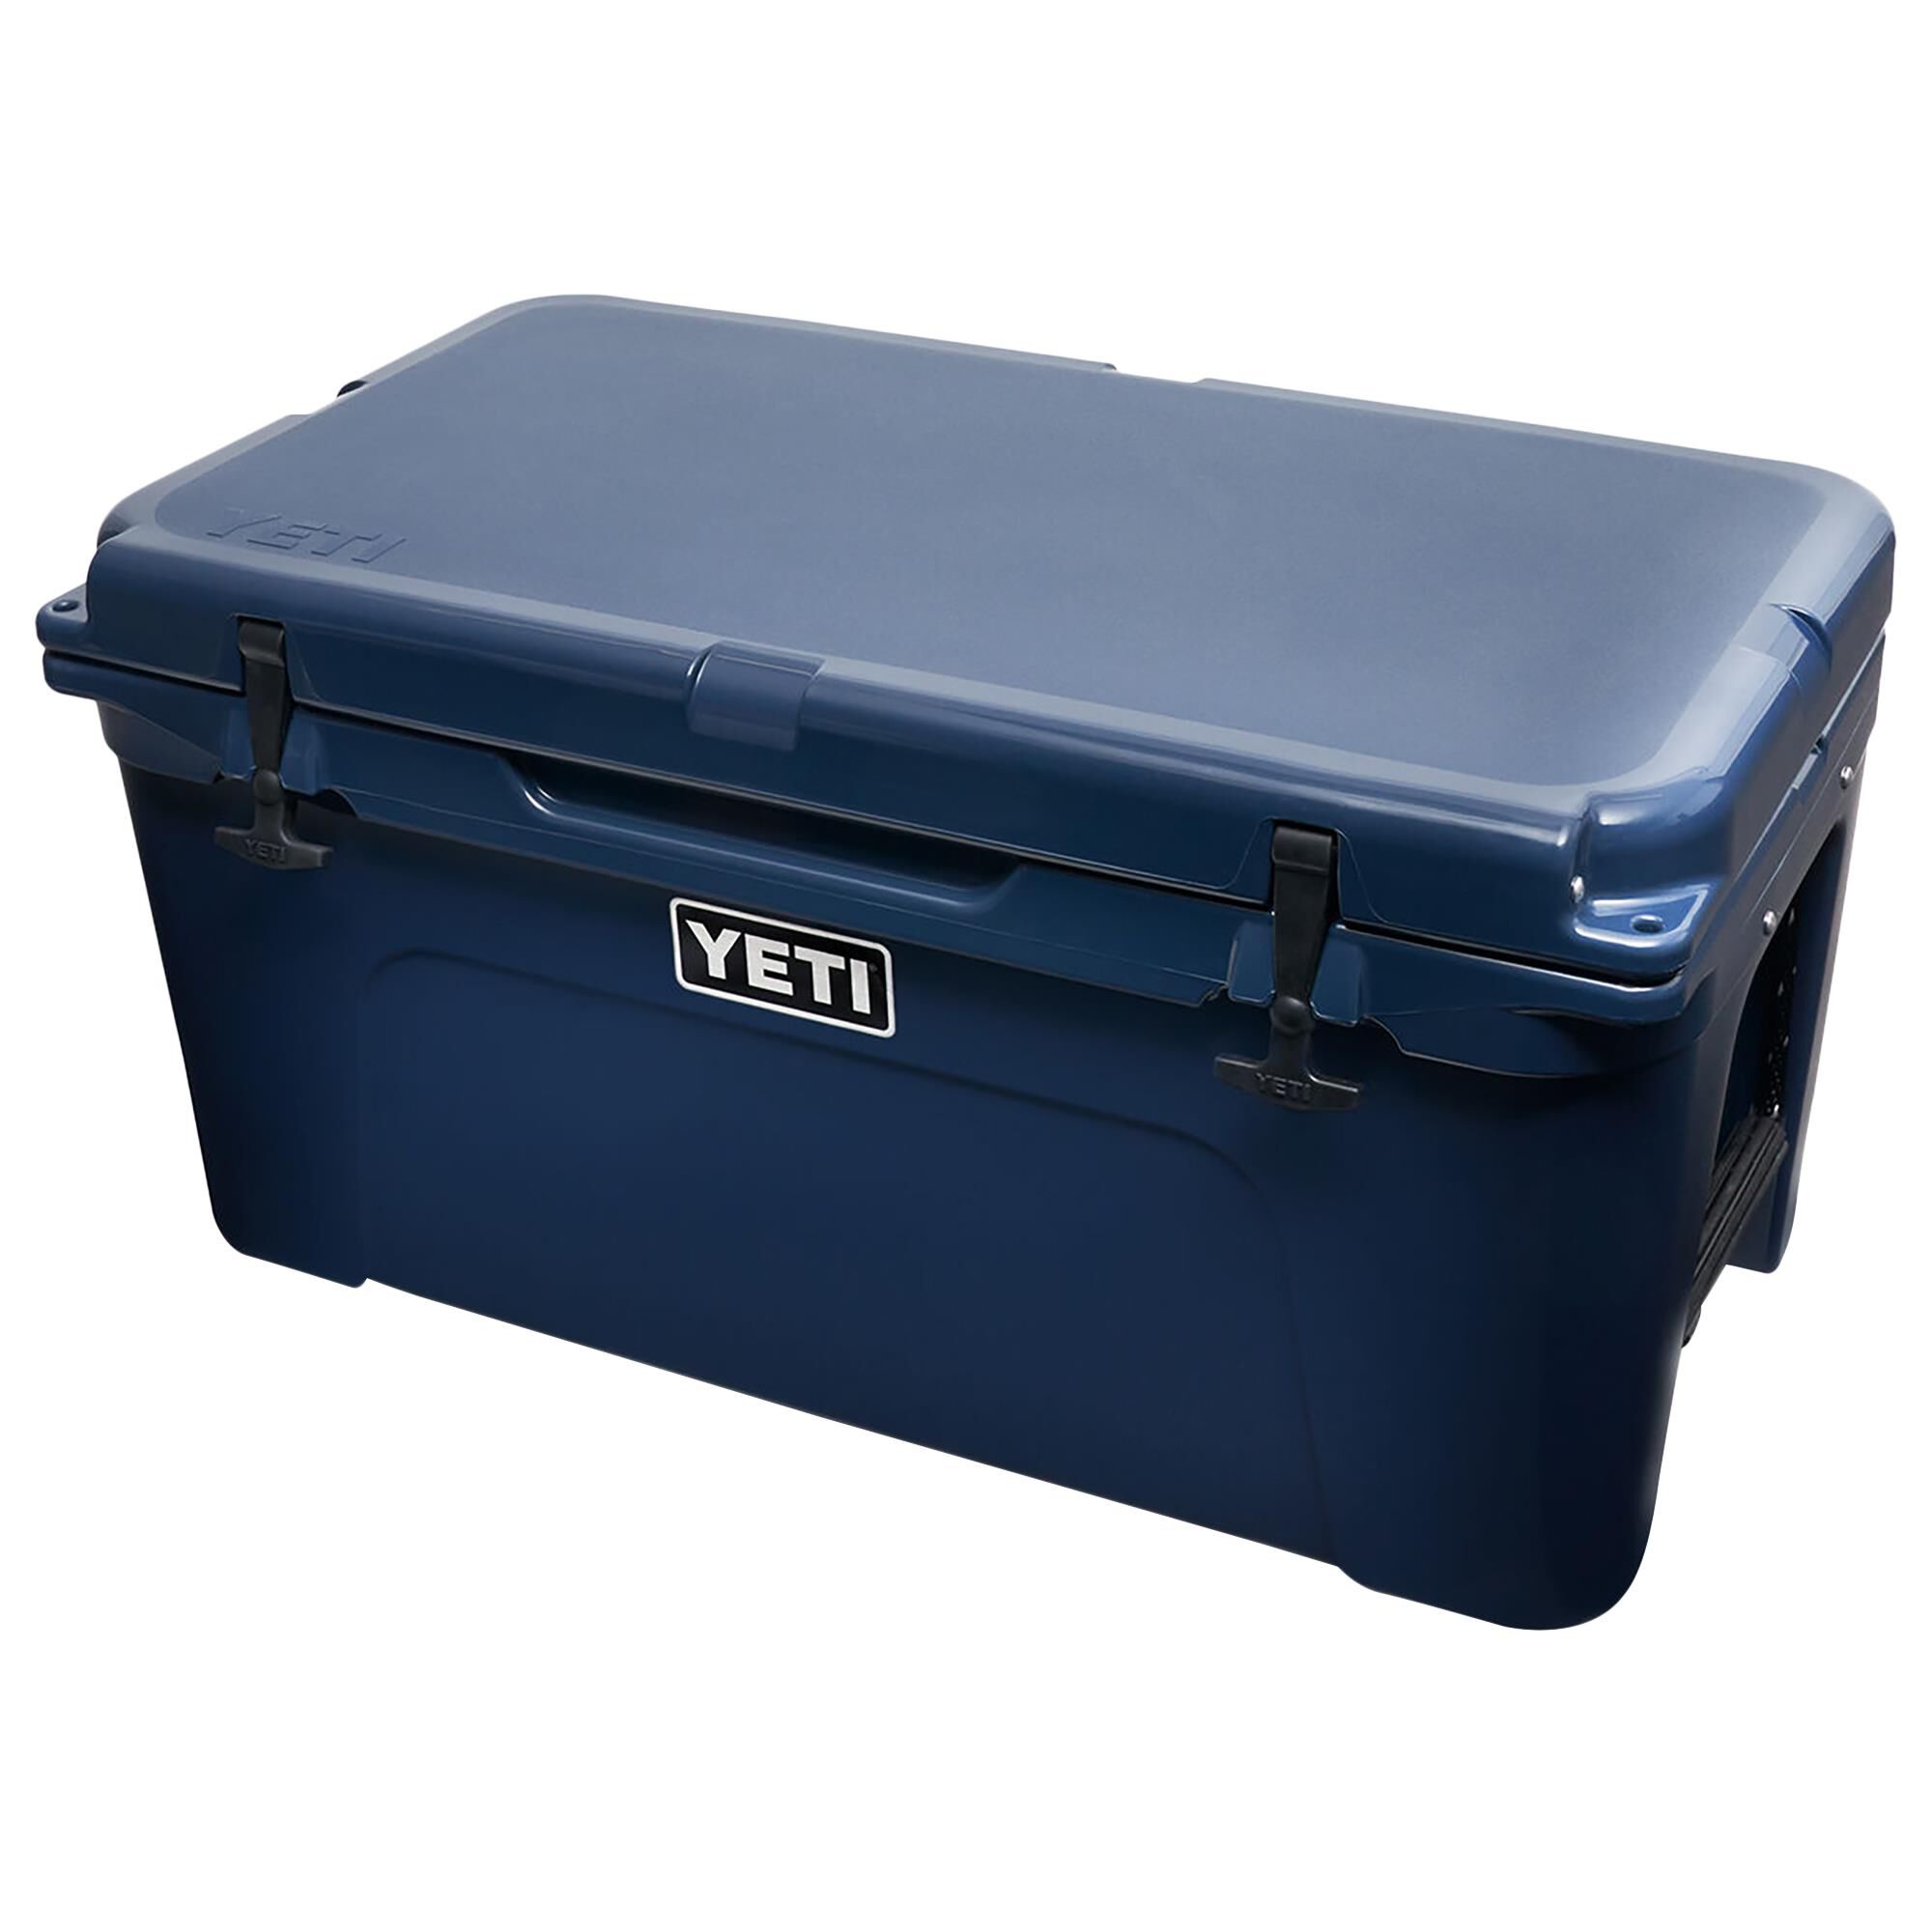 YETI Tundra 65 Hard Cooler Insulation in Navy | NFM